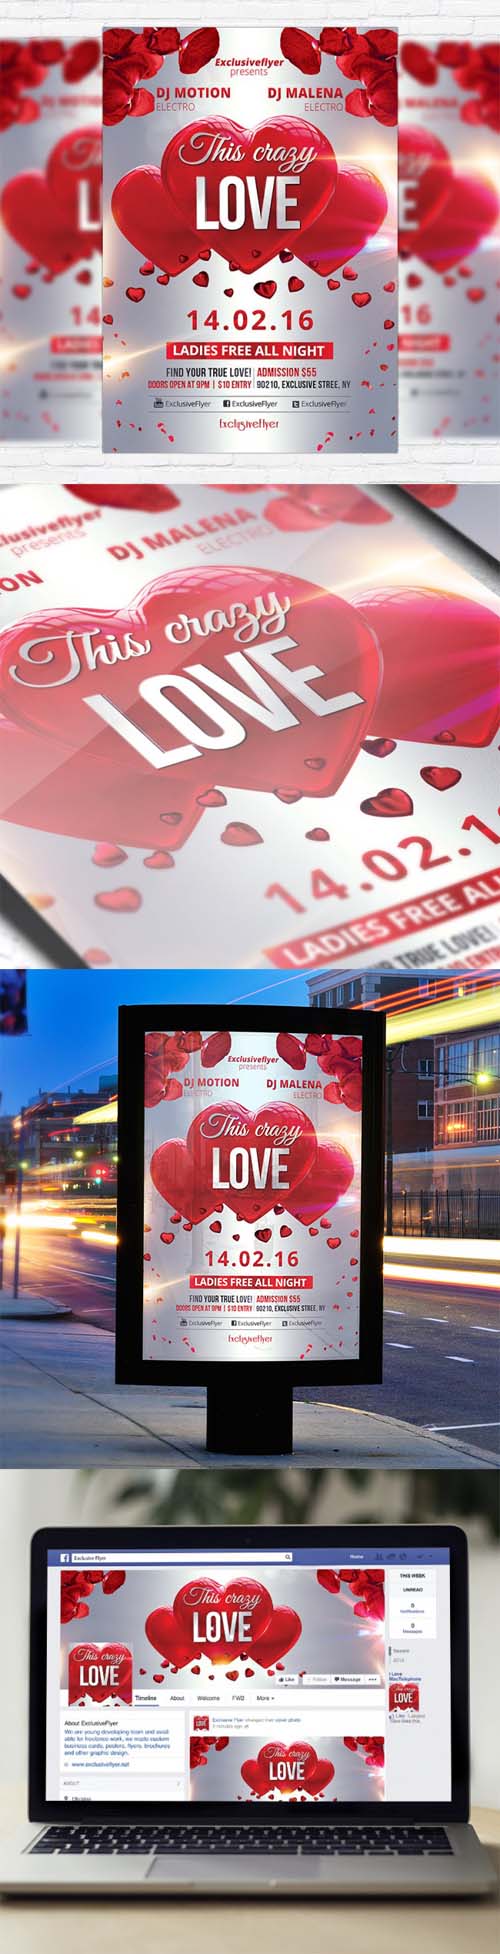 Flyer Template - This Crazy Love + Facebook Cover 5